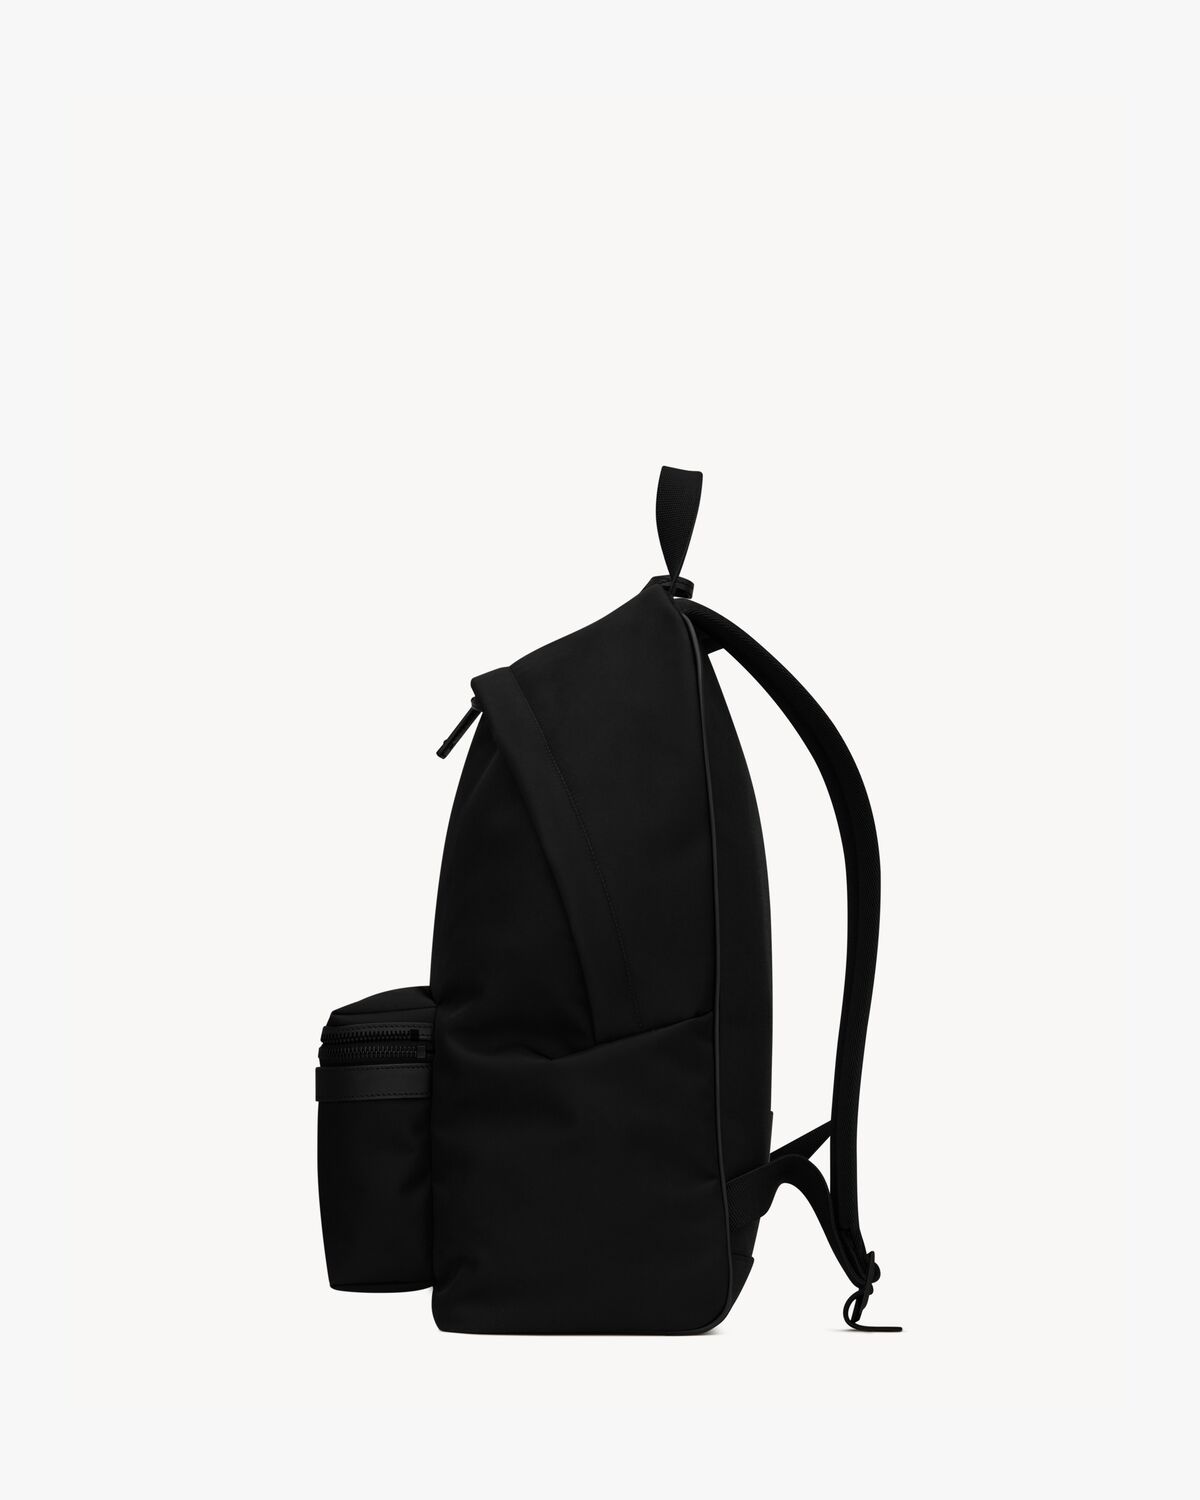 City backpack in ECONYL®, smooth leather and nylon